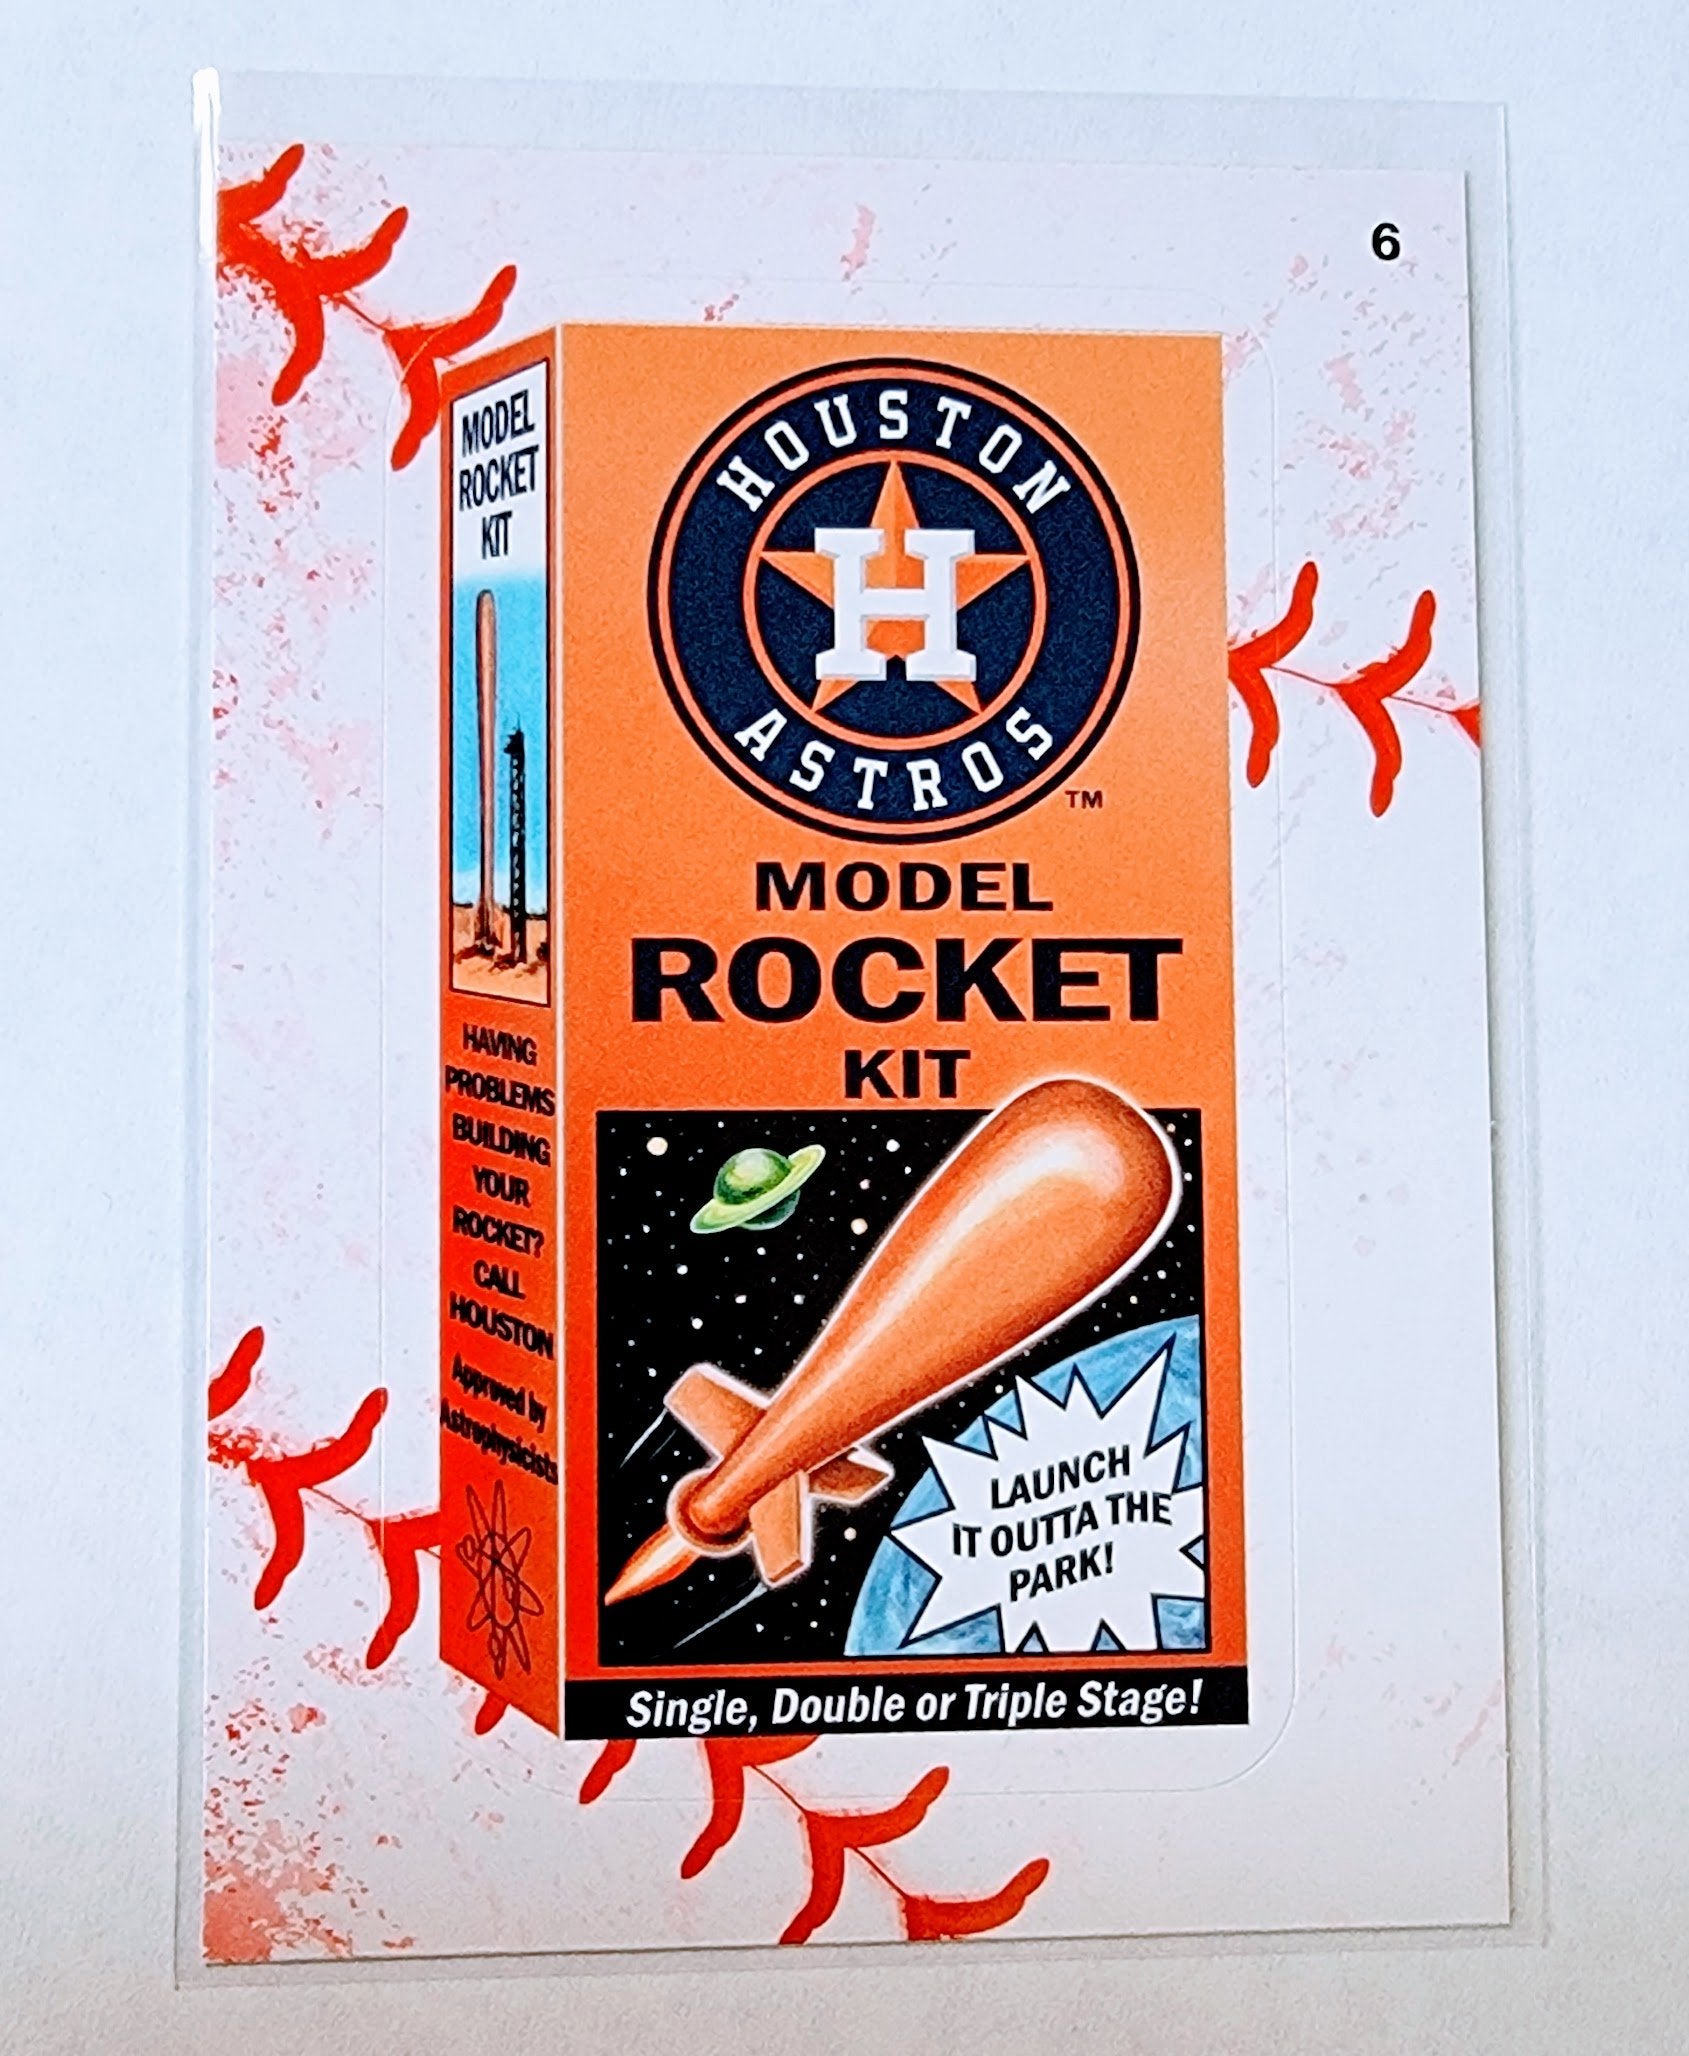 2016 Topps MLB Baseball Wacky Packages Houston Astros Model Rocket Kit Lace Parallel Sticker Trading Card MCSC1 simple Xclusive Collectibles   